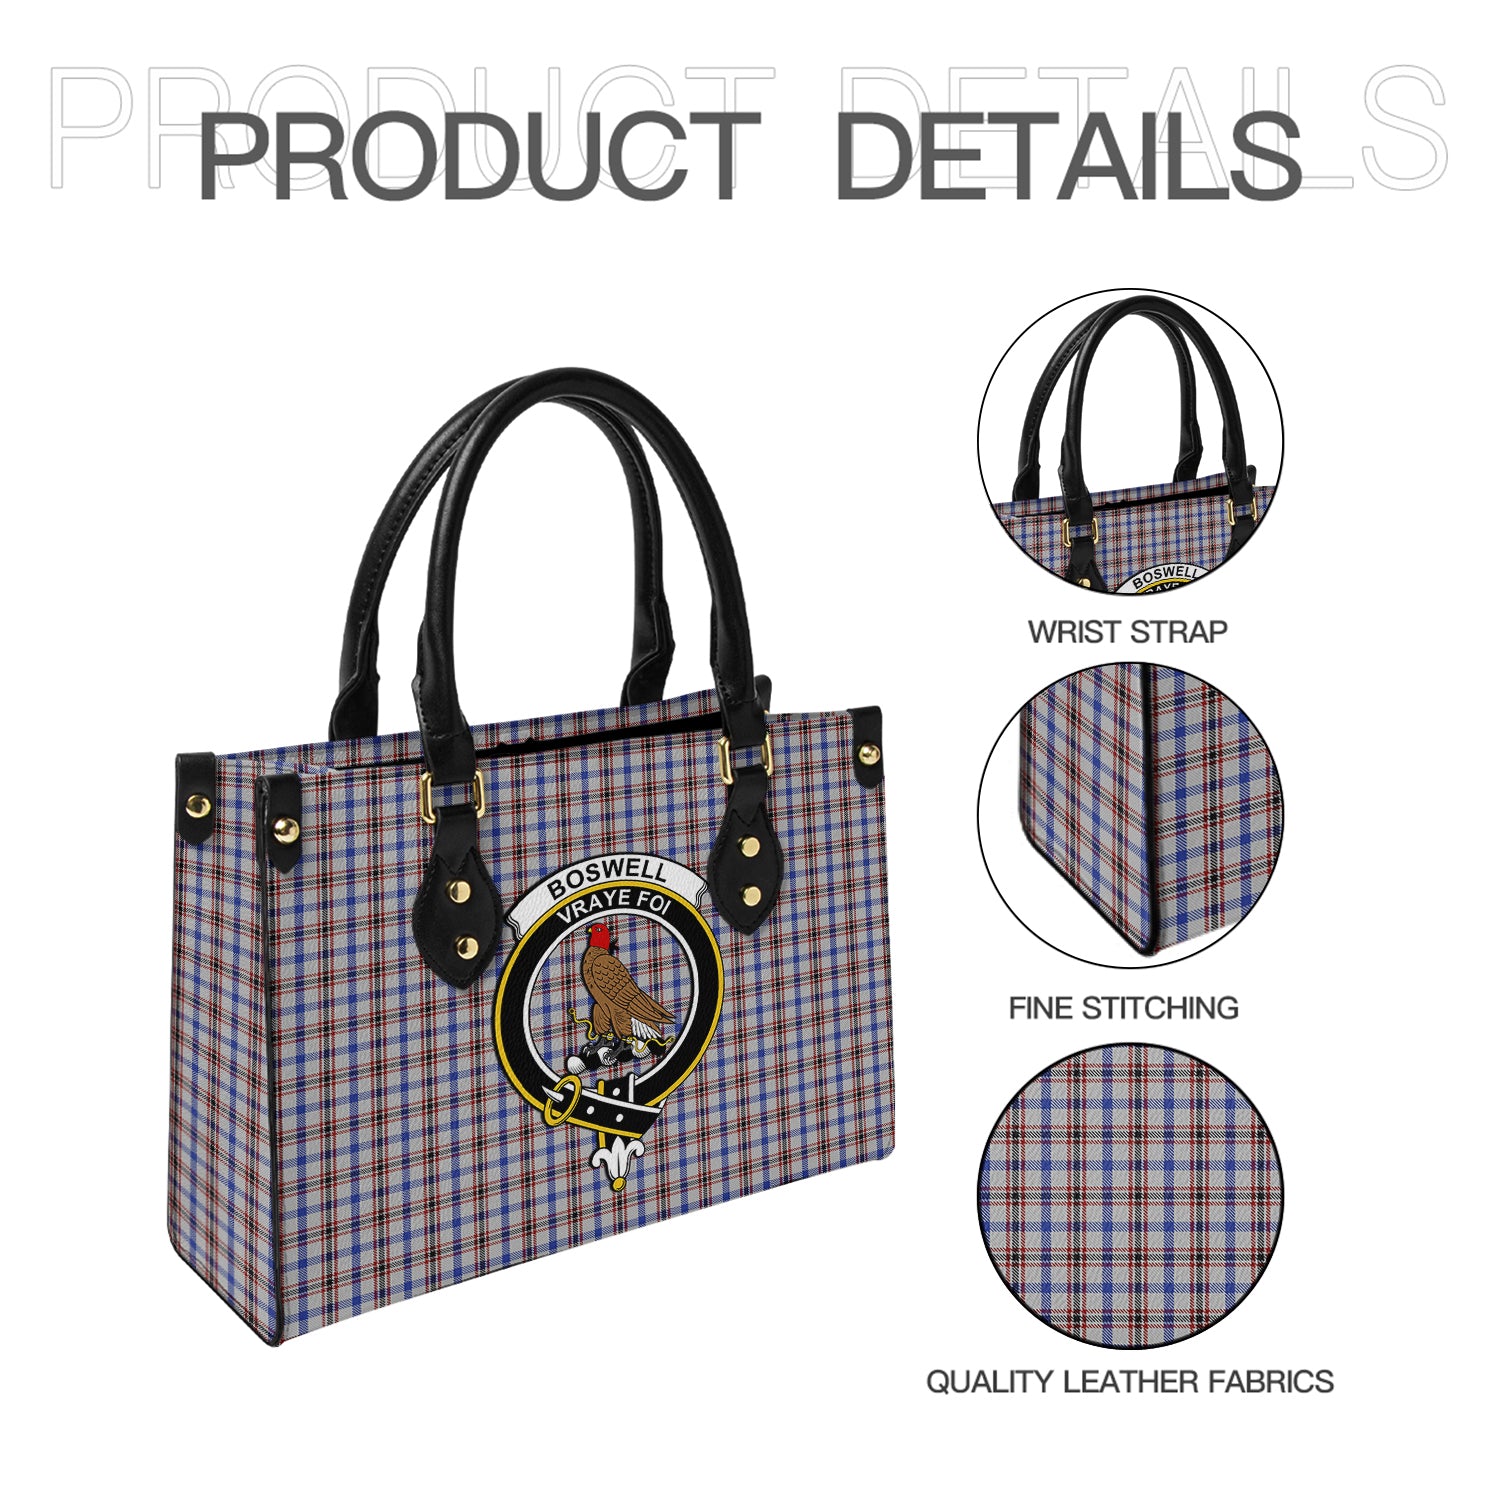 Boswell Tartan Leather Bag with Family Crest - Tartanvibesclothing